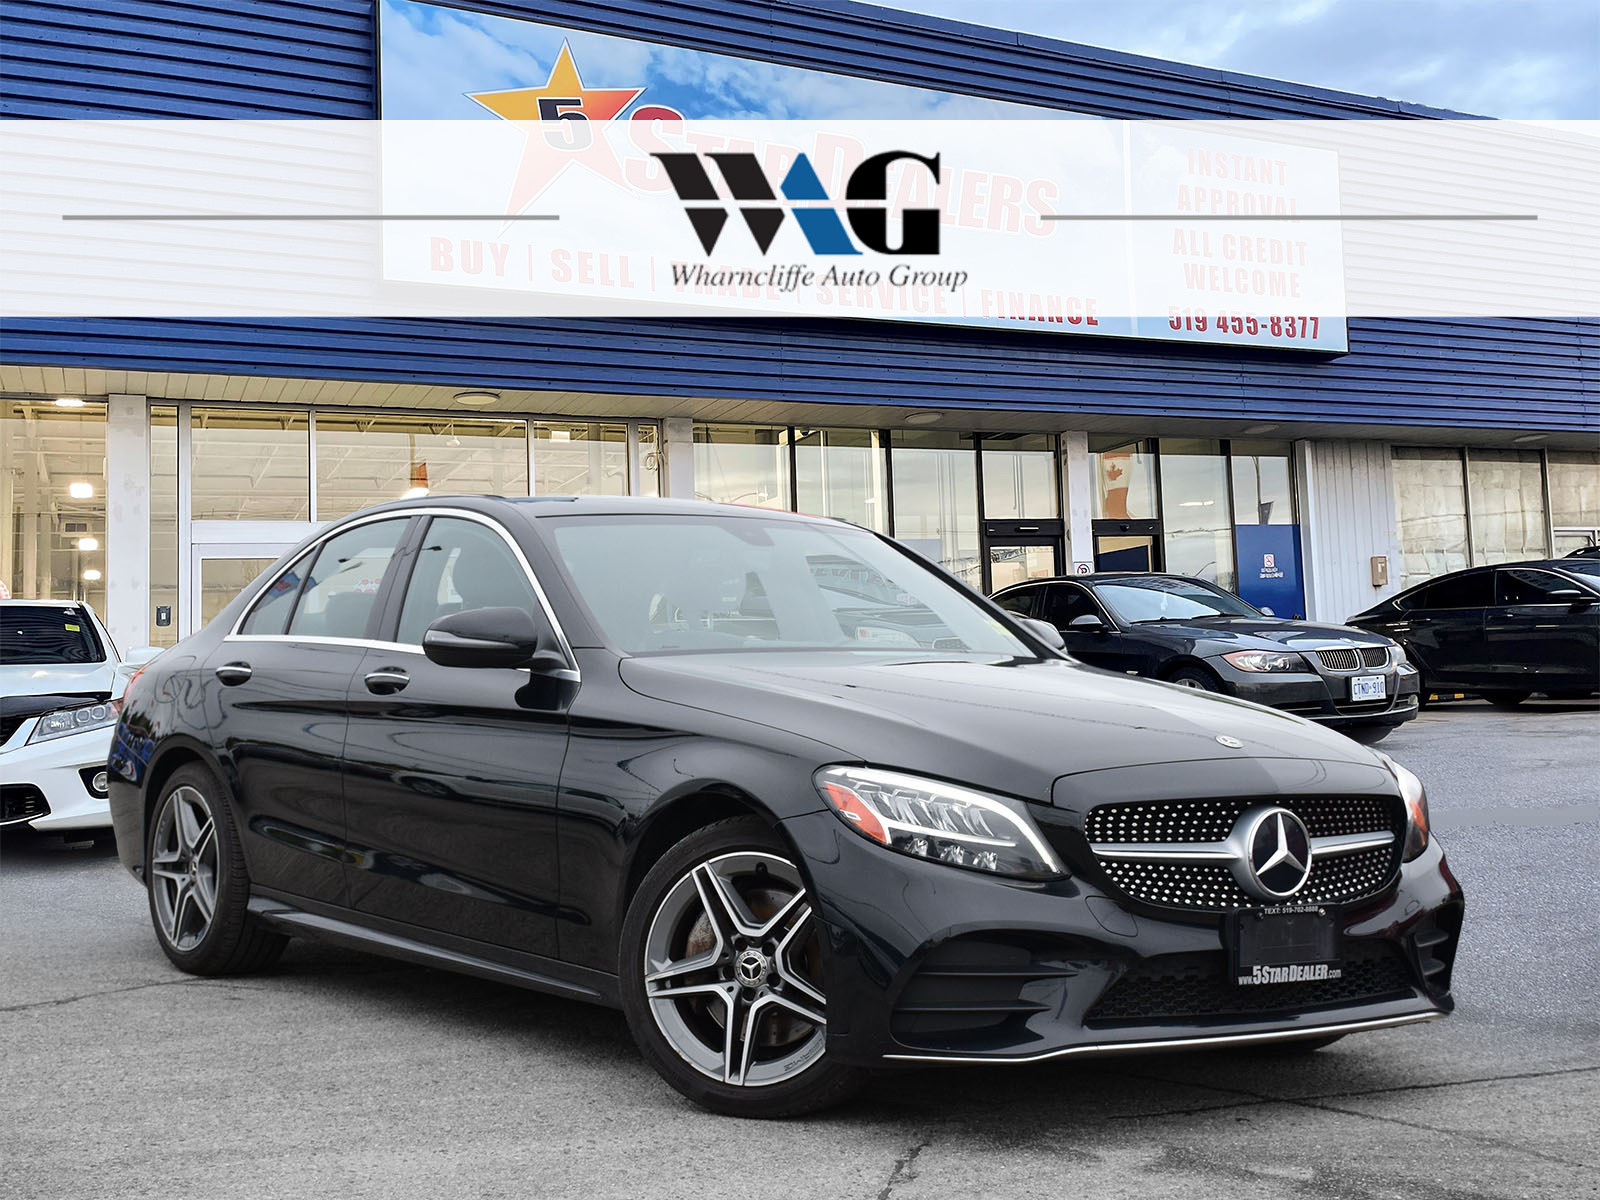 2019 Mercedes-Benz C-Class NAV LEATHER PANO ROOF MINT! WE FINANCE ALL CREDIT!